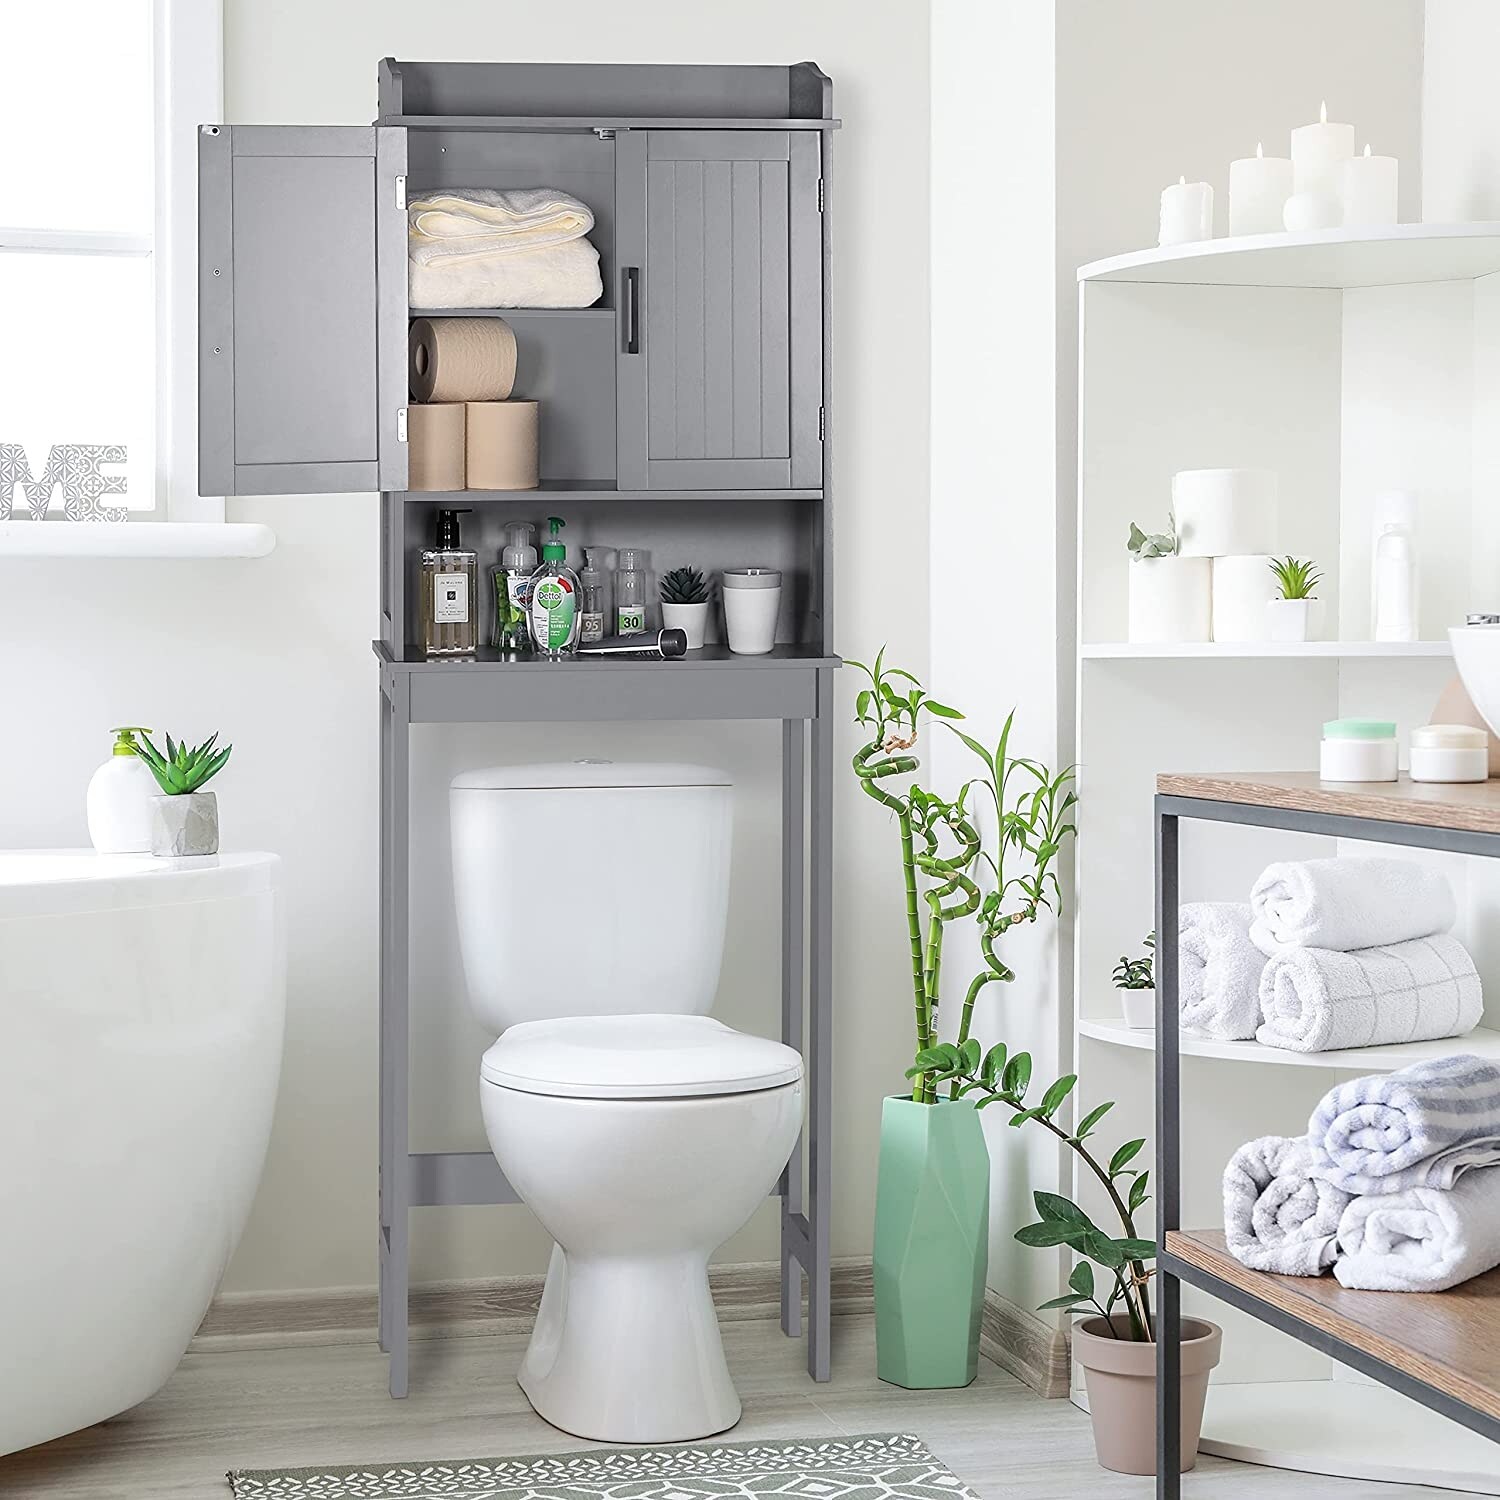 https://ak1.ostkcdn.com/images/products/is/images/direct/7596a77d90ea37f680c9dada100c7630fa39d6f1/Bathroom-Over-The-Toilet-Storage-Cabinet-Organizer-with-Shelves-and-Doors%2C-Small-Freestanding-Toilet-Shelf-Space-Saverite.jpg